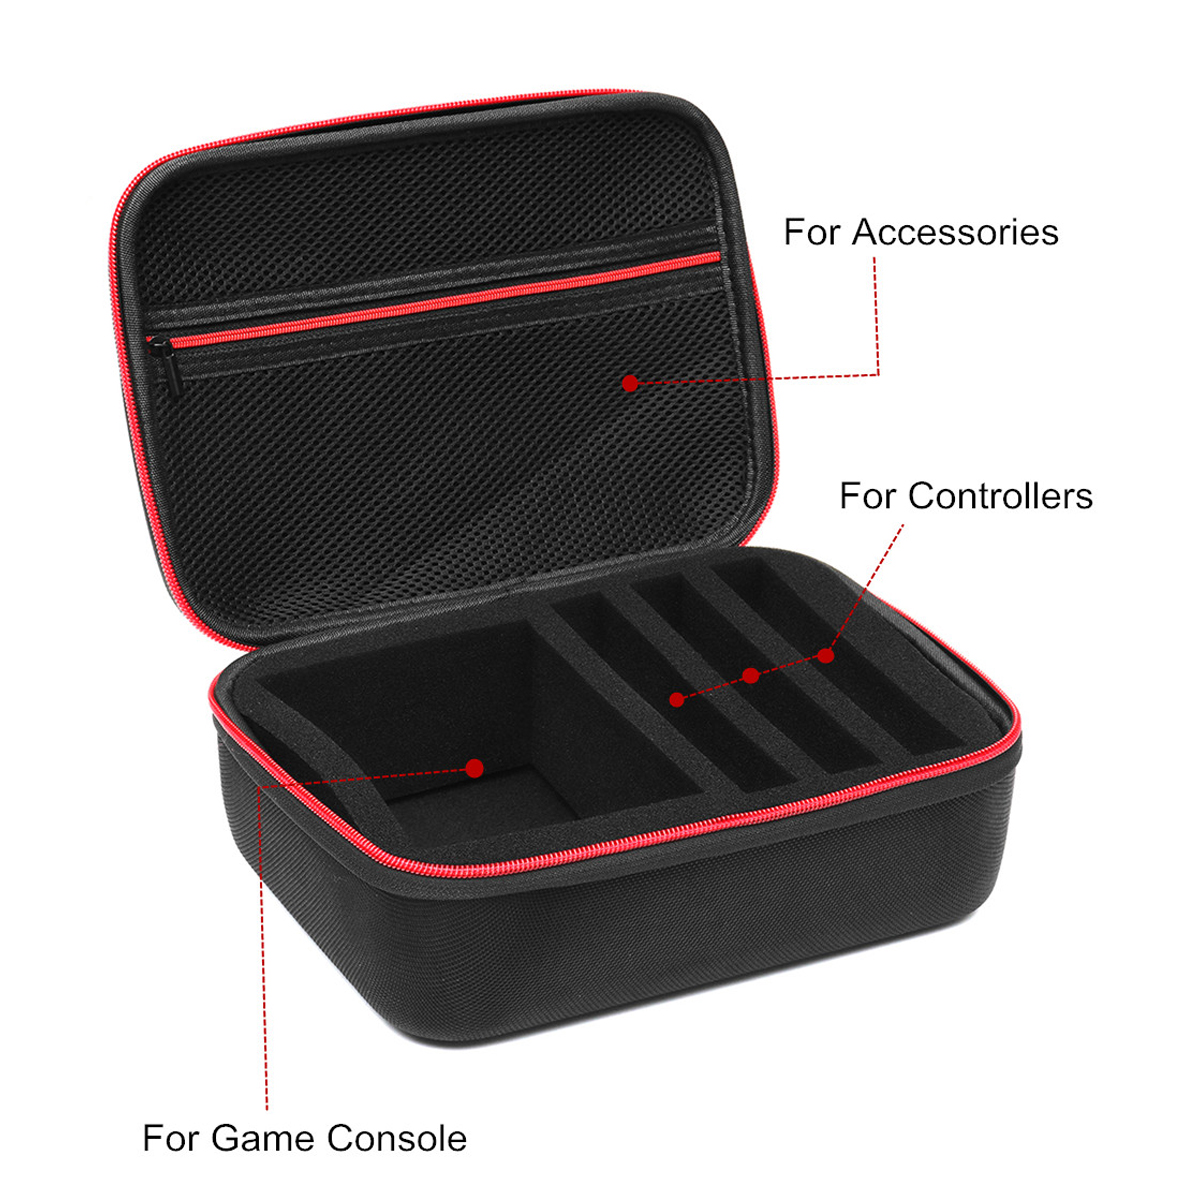 Portable Travel Storage Box Carry Case Bag For Nintendo Switch MINI SFC Game Console 18